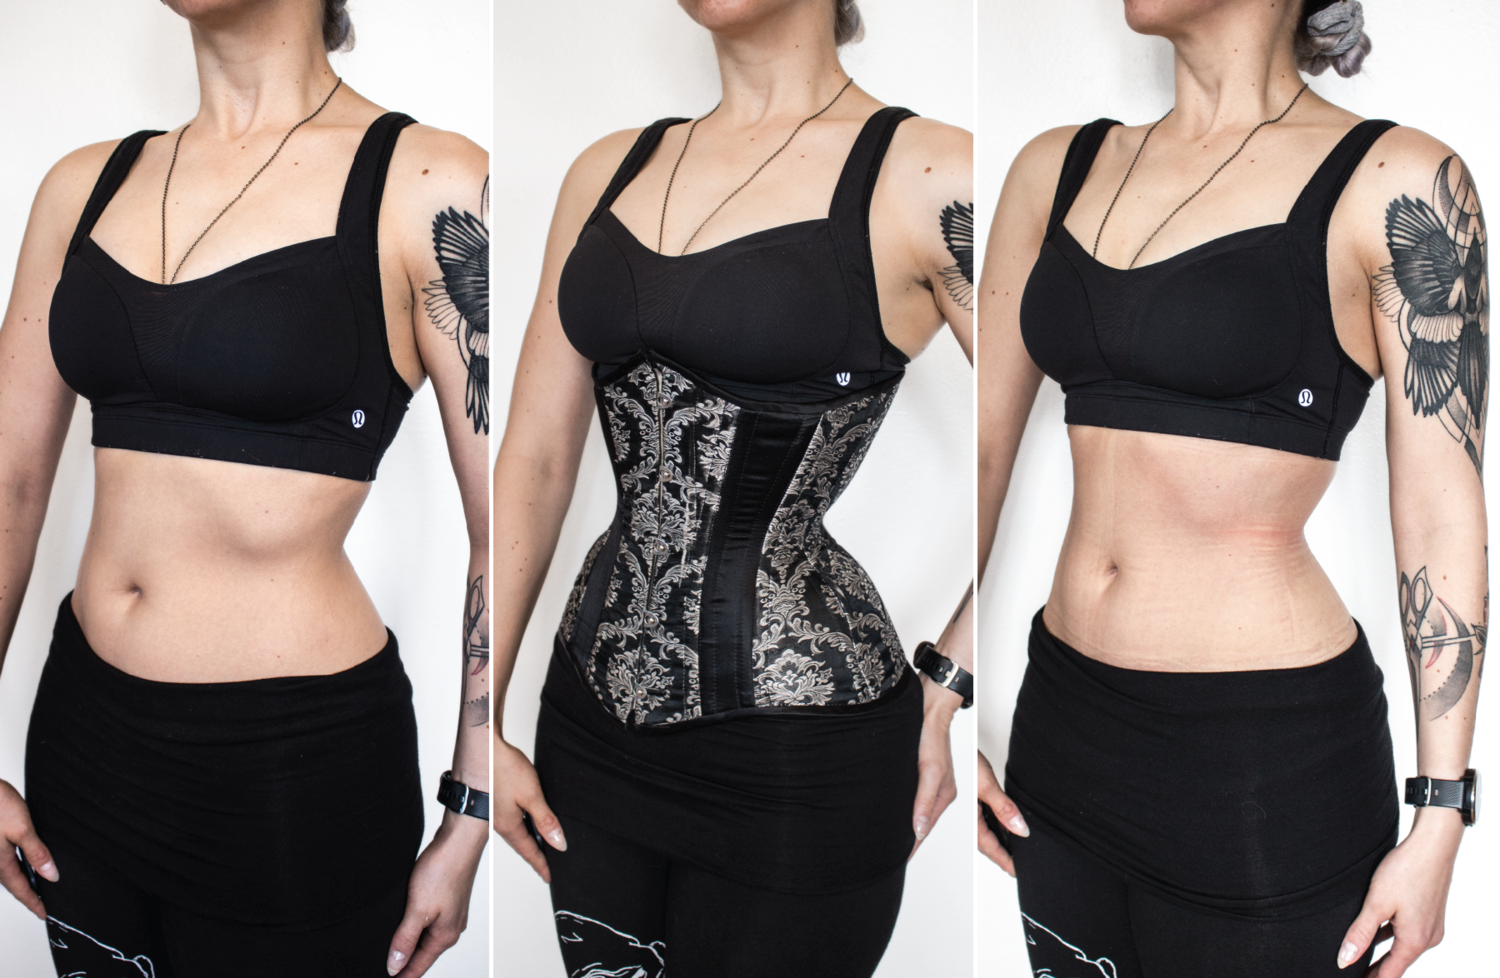 Can You Wear Corsets Under Clothes?